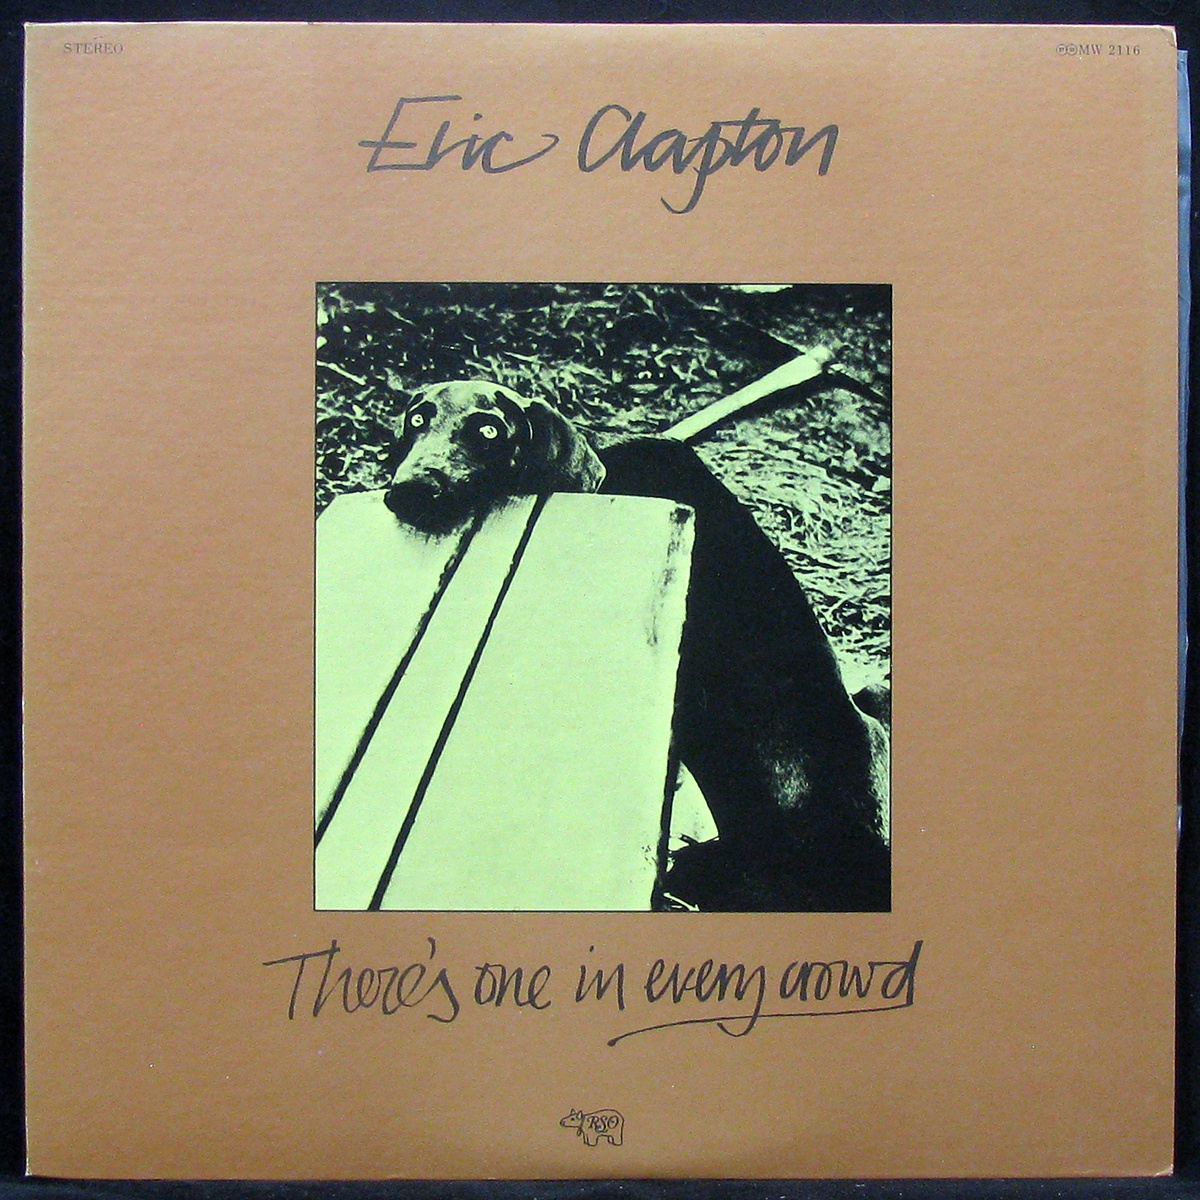 LP Eric Clapton — There's One in Every Crowd (+ booklet) фото